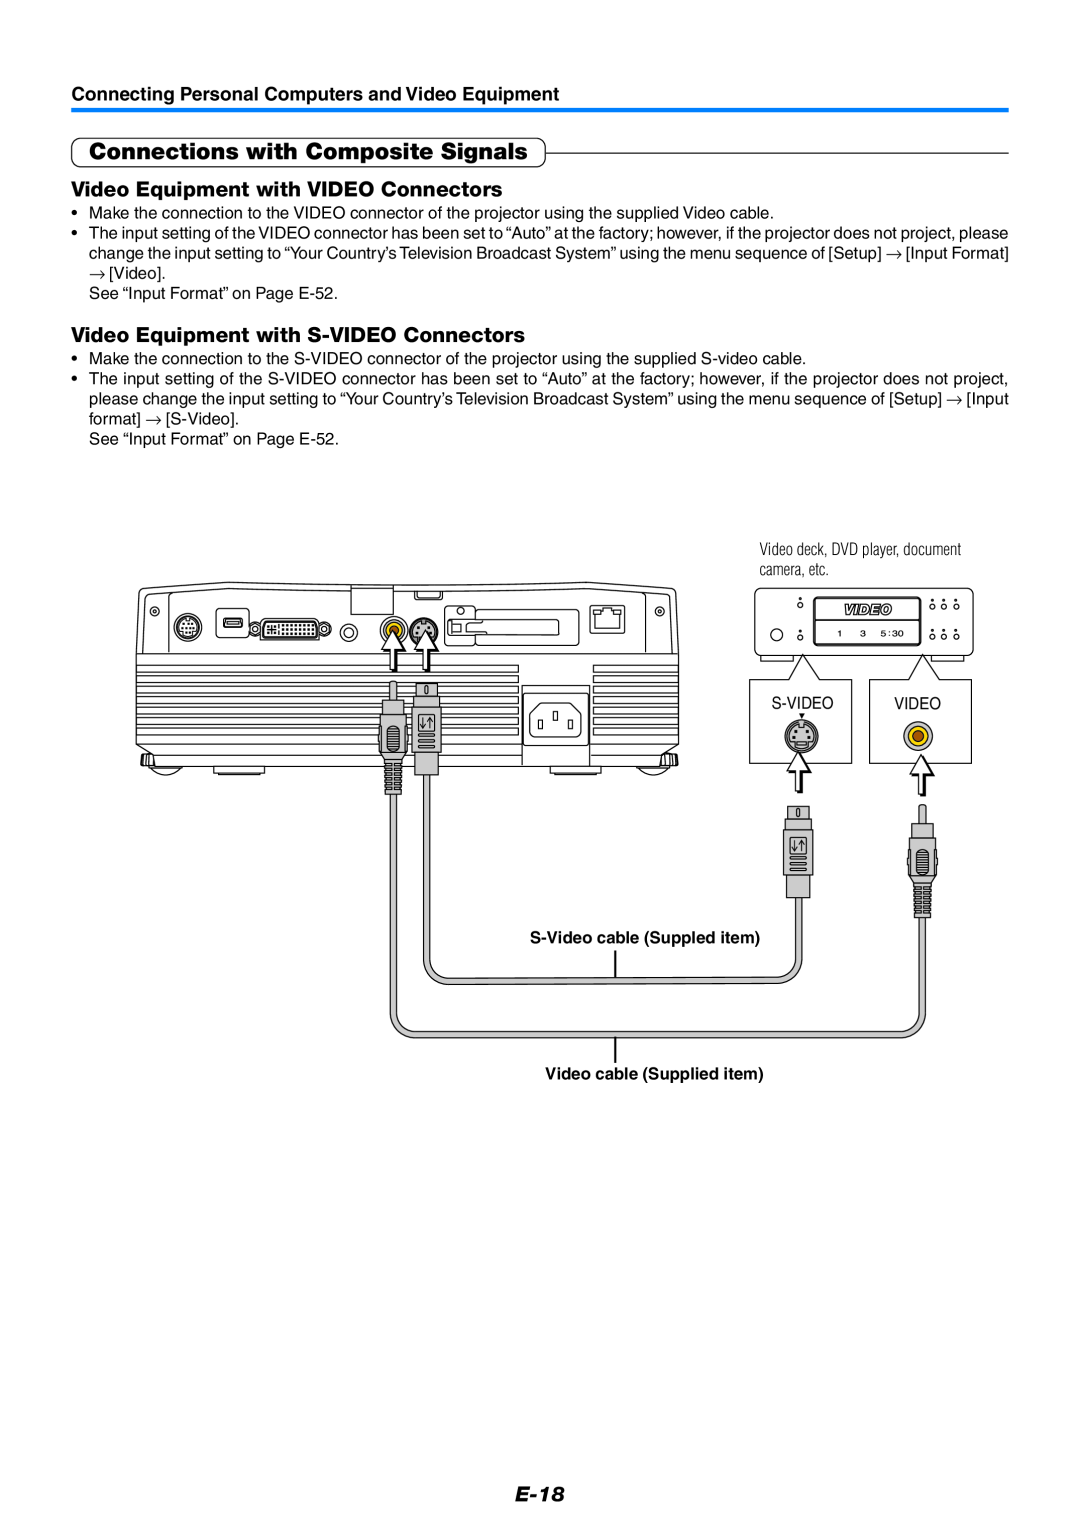 PLUS Vision U7-137, U7-132h user manual Connections with Composite Signals, Video Equipment with VIDEO Connectors, E-18 